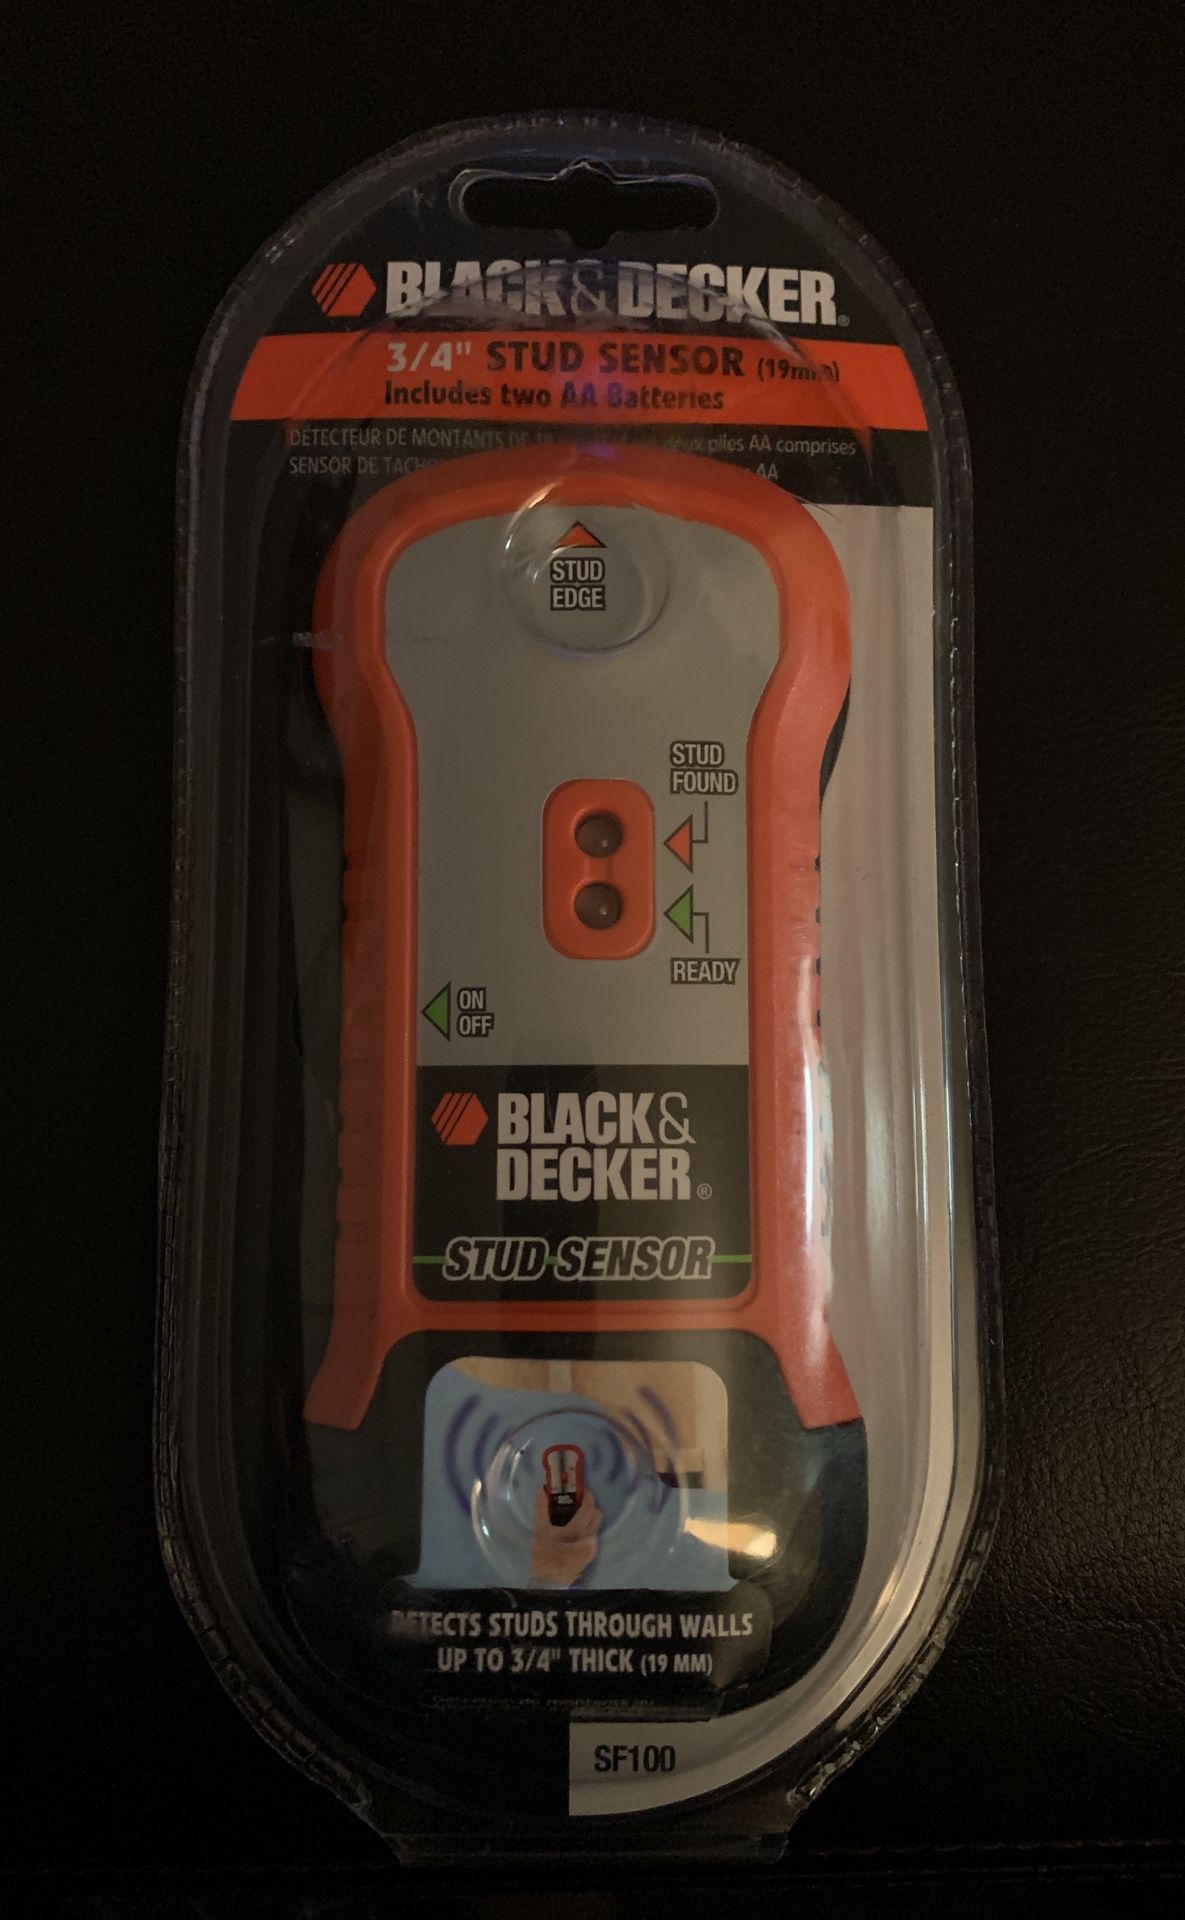 Black and decker stud finder for Sale in Costa Mesa, CA - OfferUp